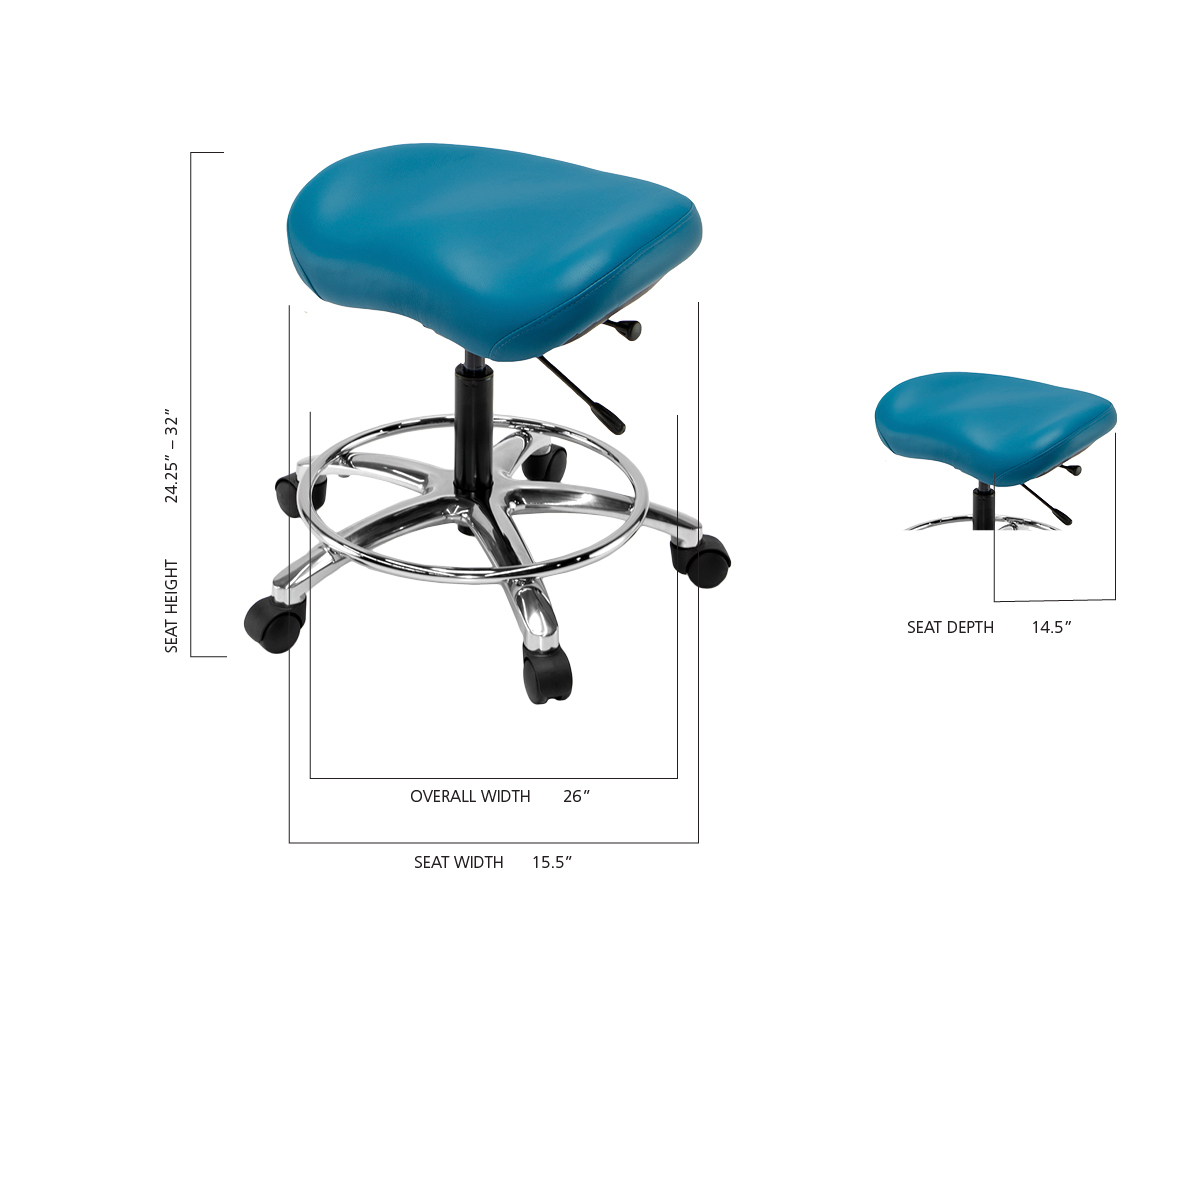 Size Guide for LIFEFORM Chairs